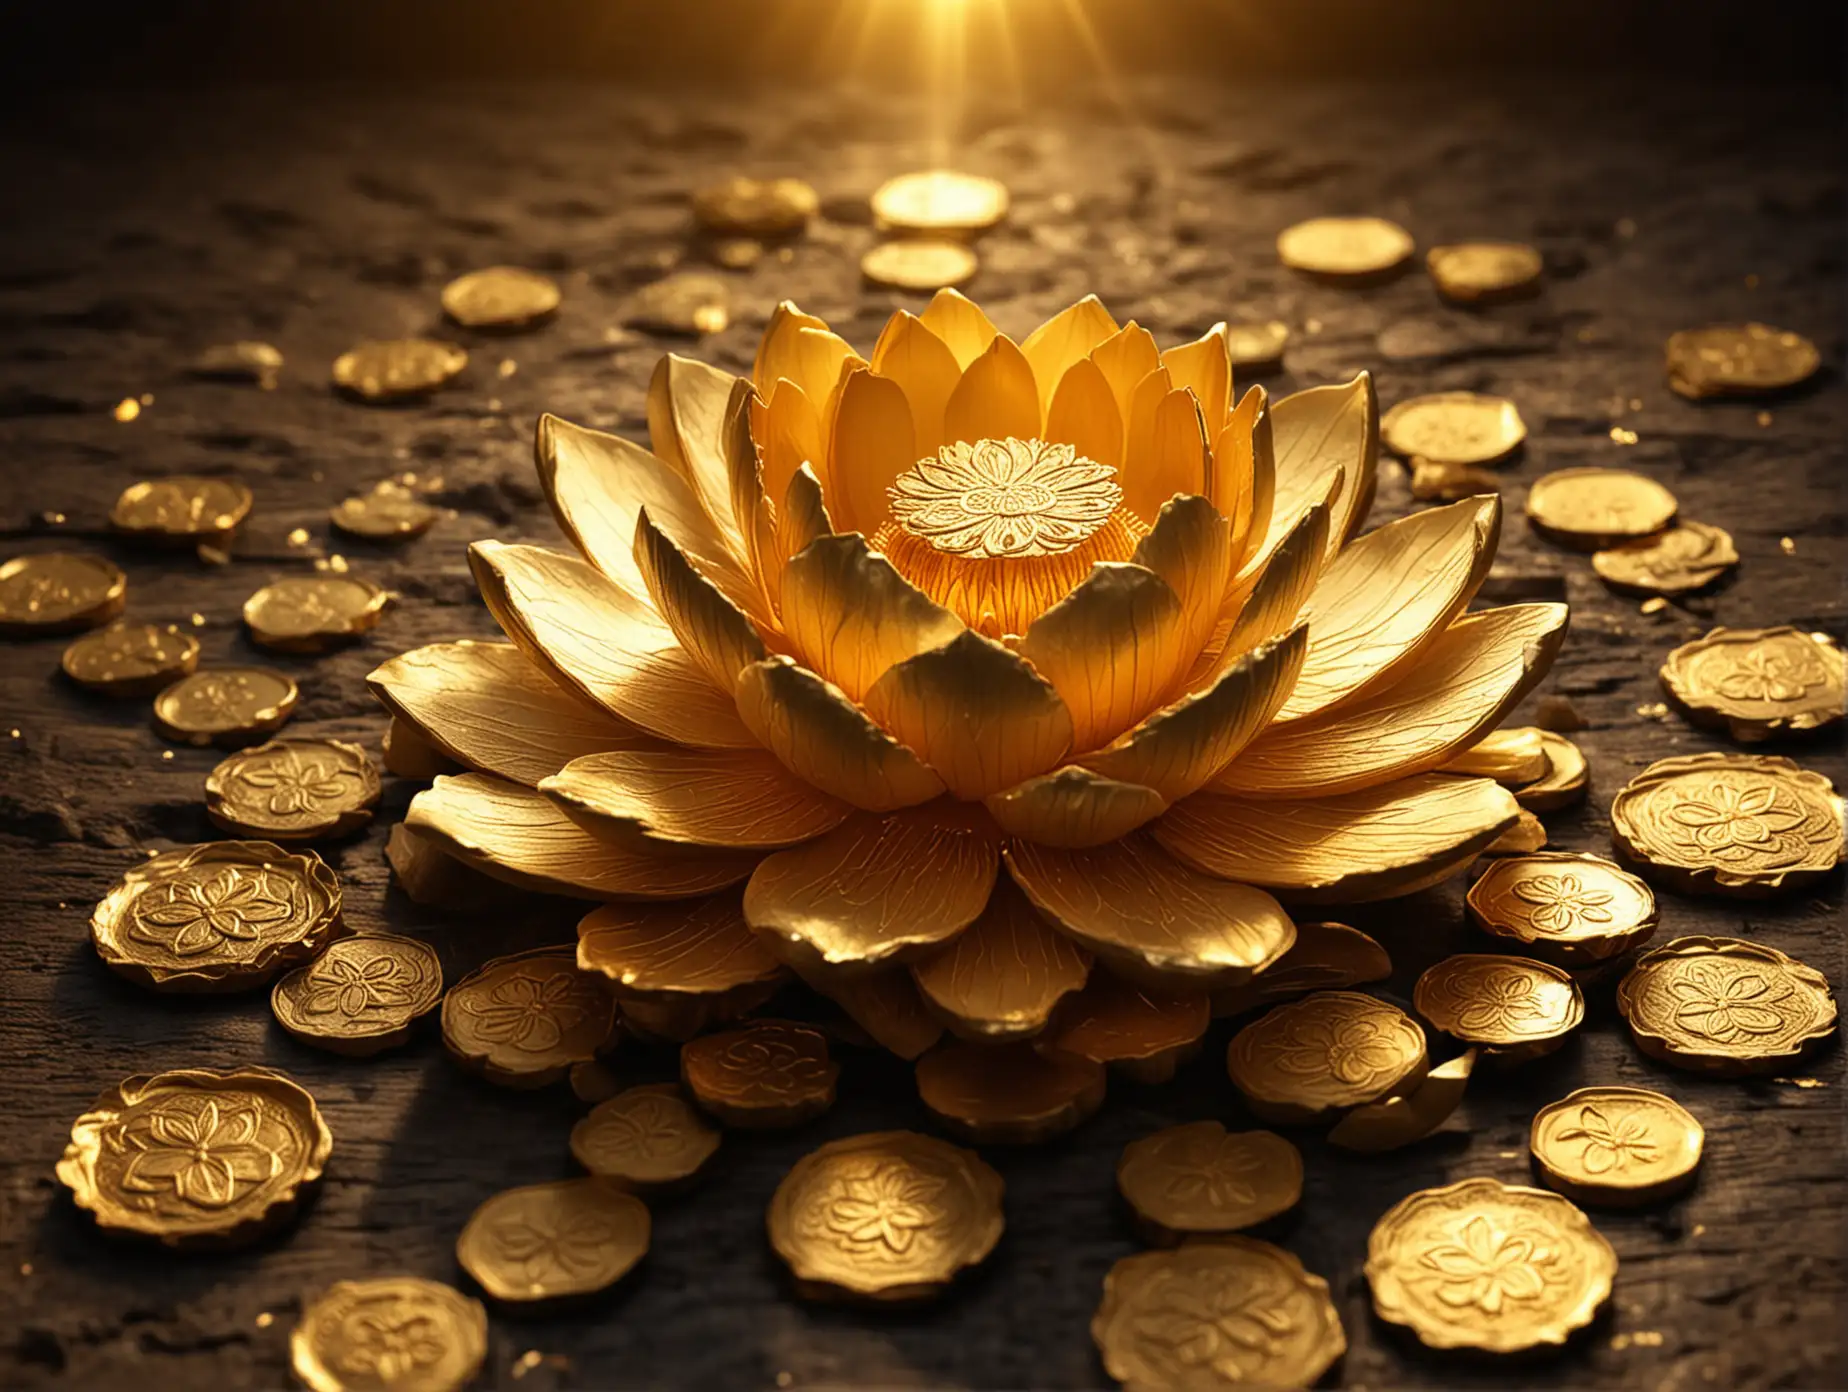 Golden-Lotus-Emitting-Golden-Light-with-Gold-Coins